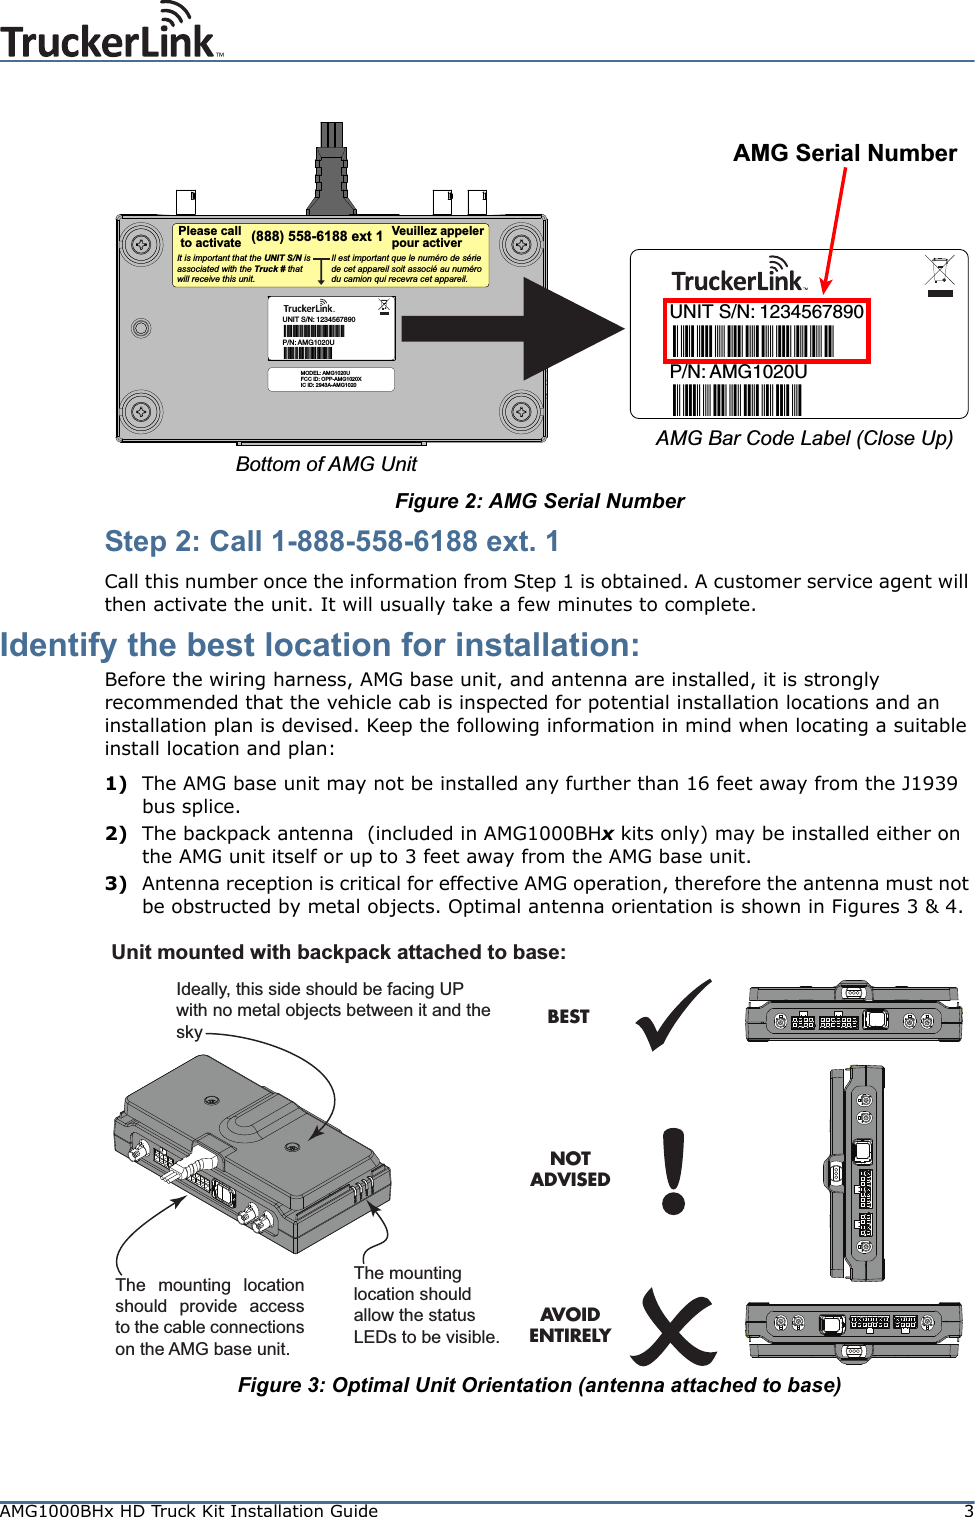 AMG1000BHx HD Truck Kit Installation Guide 3Figure 2: AMG Serial NumberStep 2: Call 1-888-558-6188 ext. 1Call this number once the information from Step 1 is obtained. A customer service agent will then activate the unit. It will usually take a few minutes to complete.Identify the best location for installation:Before the wiring harness, AMG base unit, and antenna are installed, it is strongly recommended that the vehicle cab is inspected for potential installation locations and an installation plan is devised. Keep the following information in mind when locating a suitable install location and plan:1) The AMG base unit may not be installed any further than 16 feet away from the J1939 bus splice.2) The backpack antenna  (included in AMG1000BHx kits only) may be installed either on the AMG unit itself or up to 3 feet away from the AMG base unit.3) Antenna reception is critical for effective AMG operation, therefore the antenna must not be obstructed by metal objects. Optimal antenna orientation is shown in Figures 3 &amp; 4.Figure 3: Optimal Unit Orientation (antenna attached to base)P/N:UNIT S/N: 12345678901234567890AMG1020UAMG1020U(888) 558-6188 ext 1Il est important que le numéro de série de cet appareil soit associé au numéro du camion qui recevra cet appareil.It is important that the UNIT S/N is associated with the Truck # that will receive this unit.Please callto activateVeuillez appelerpour activerAMG Serial NumberBottom of AMG UnitAMG Bar Code Label (Close Up)P/N:UNIT S/N: 12345678901234567890AMG1020UAMG1020UMODEL: AMG1020UFCC ID: OPP-AMG1020XIC ID: 2943A-AMG1020Unit mounted with backpack attached to base:BESTNOTADVISEDAVOIDENTIRELYThe mounting location should provide access to the cable connections on the AMG base unit.Ideally, this side should be facing UP with no metal objects between it and the sky The mounting location should allow the status LEDs to be visible.